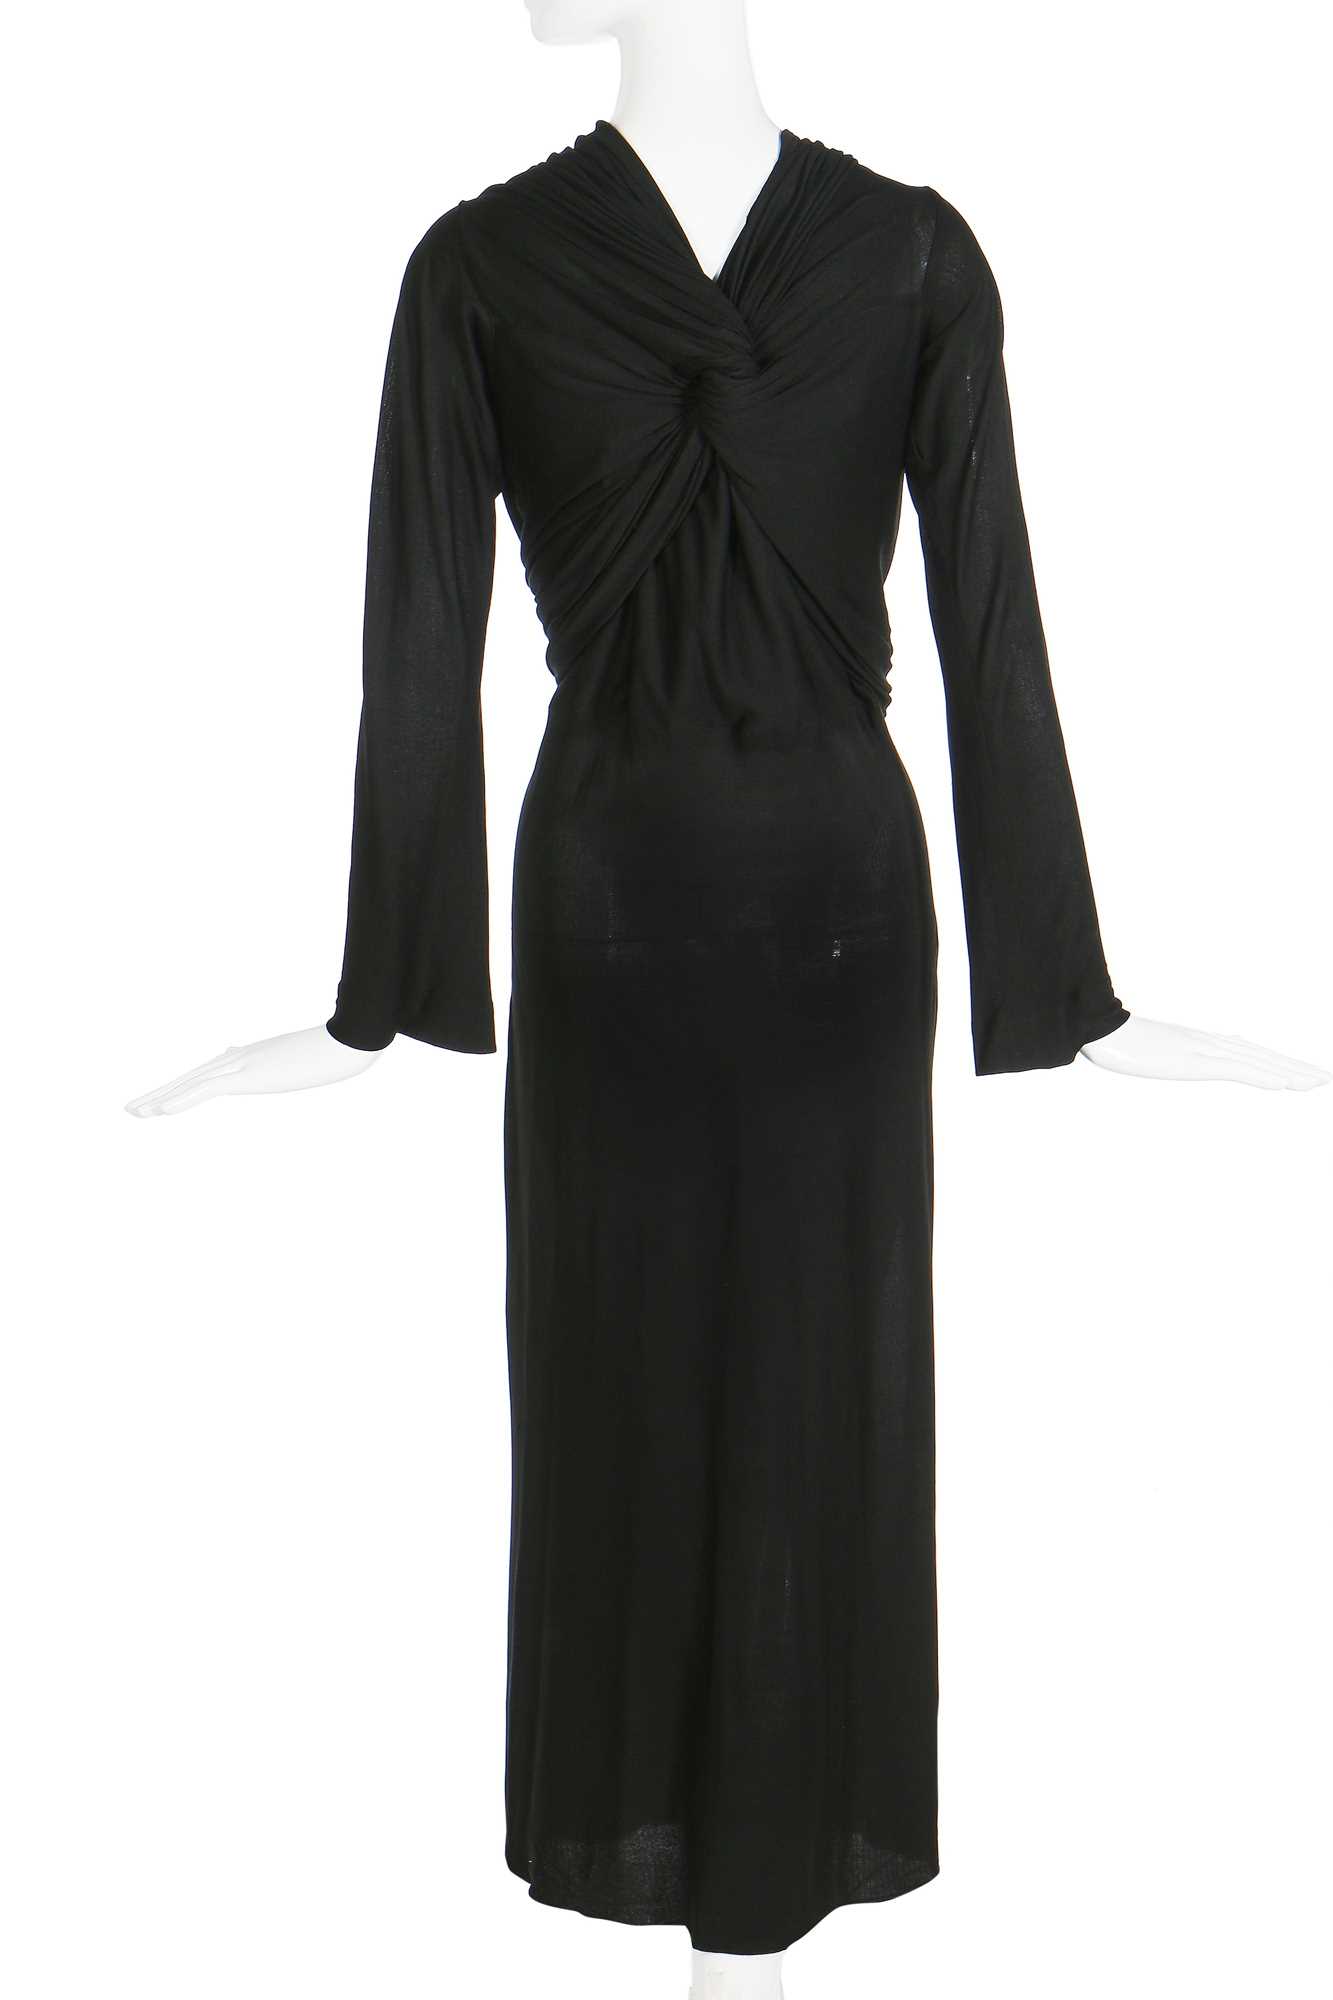 Lot 67 - A rare and early Alix Barton/ Madame Grès couture draped silk jersey evening gown, circa 1936